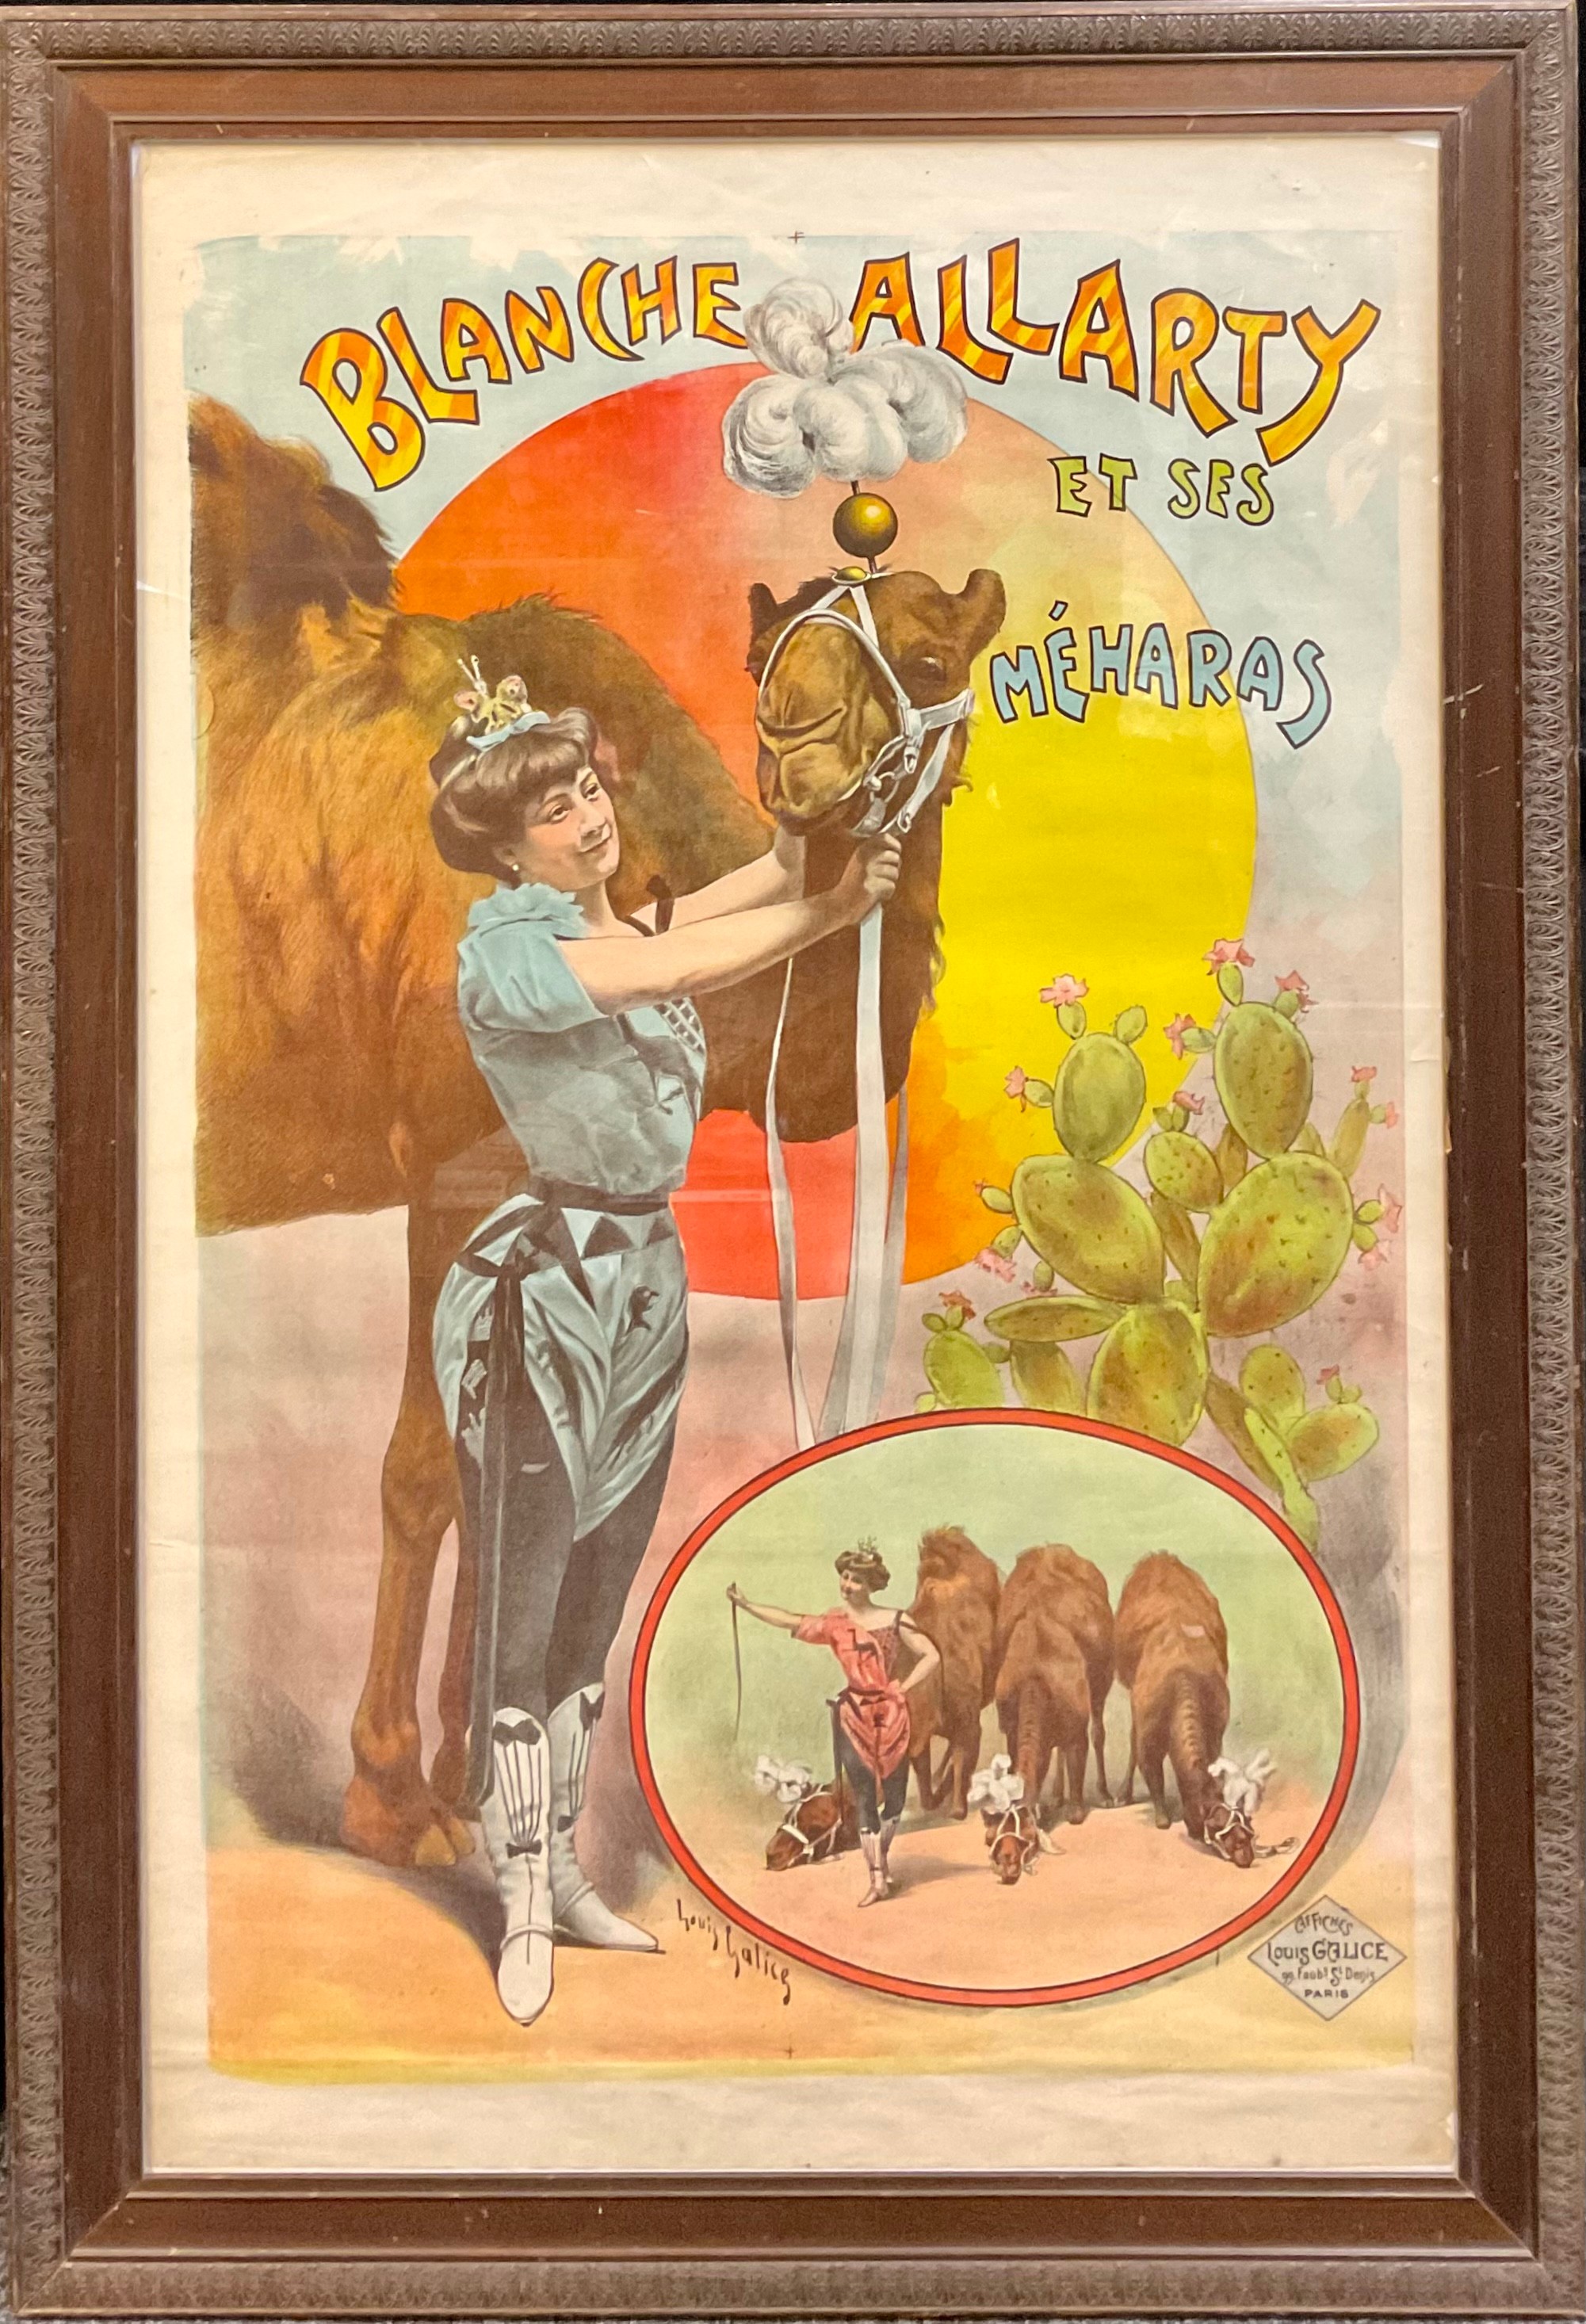 Circus and the Fairground - a poster, Blanche Allarty et ses Meharas, colour lithograph, printed - Image 2 of 3